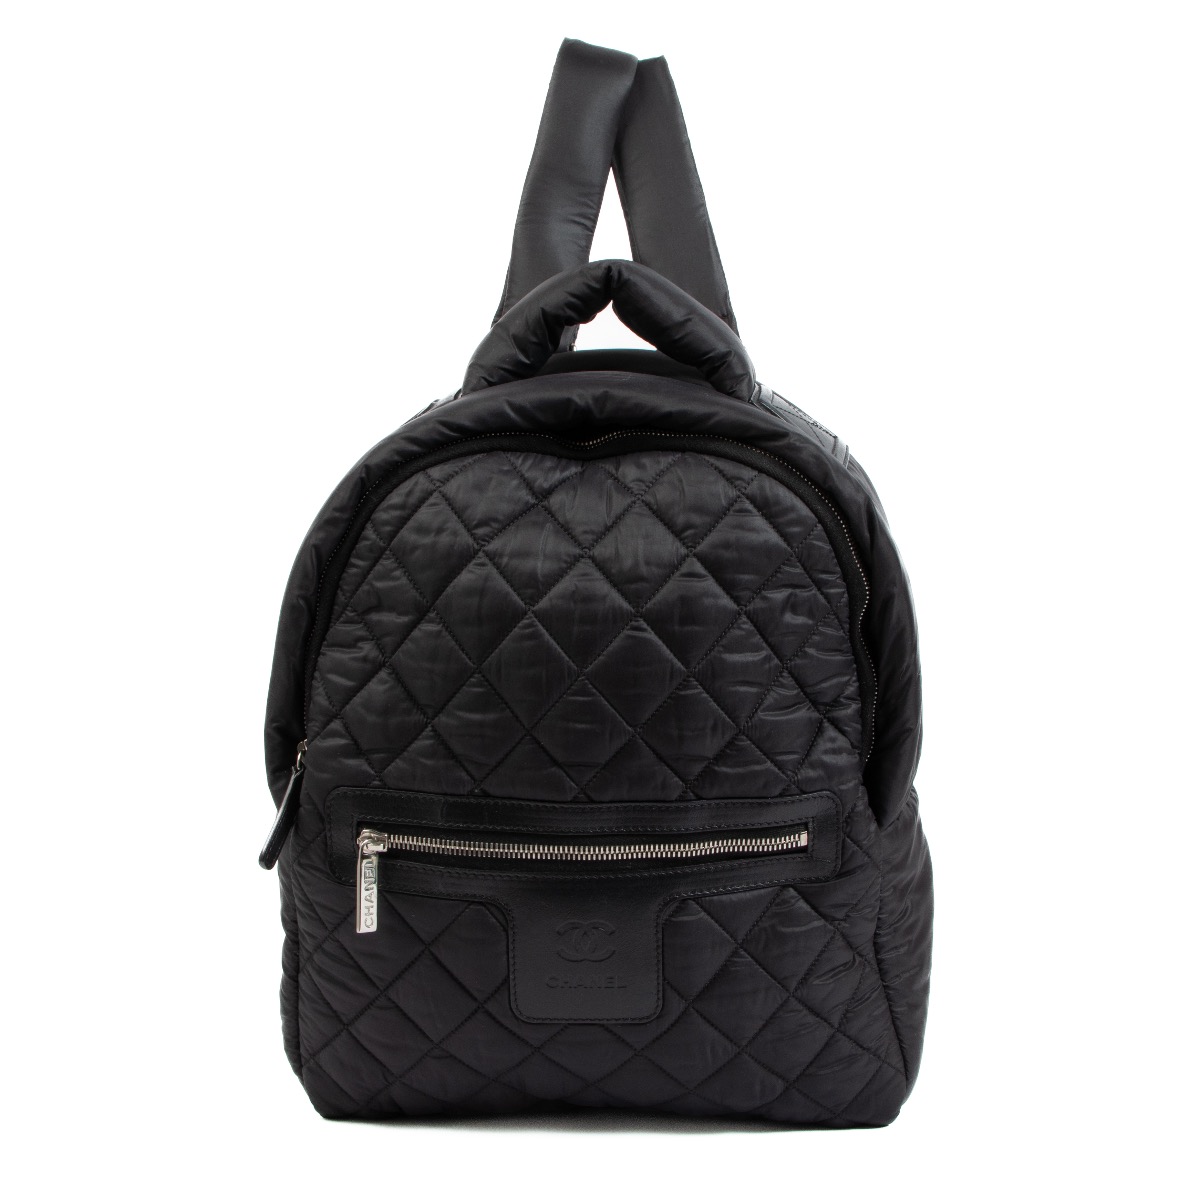 CHANEL Black Quilted Nylon and Leather Coco Cocoon Backpack Bag